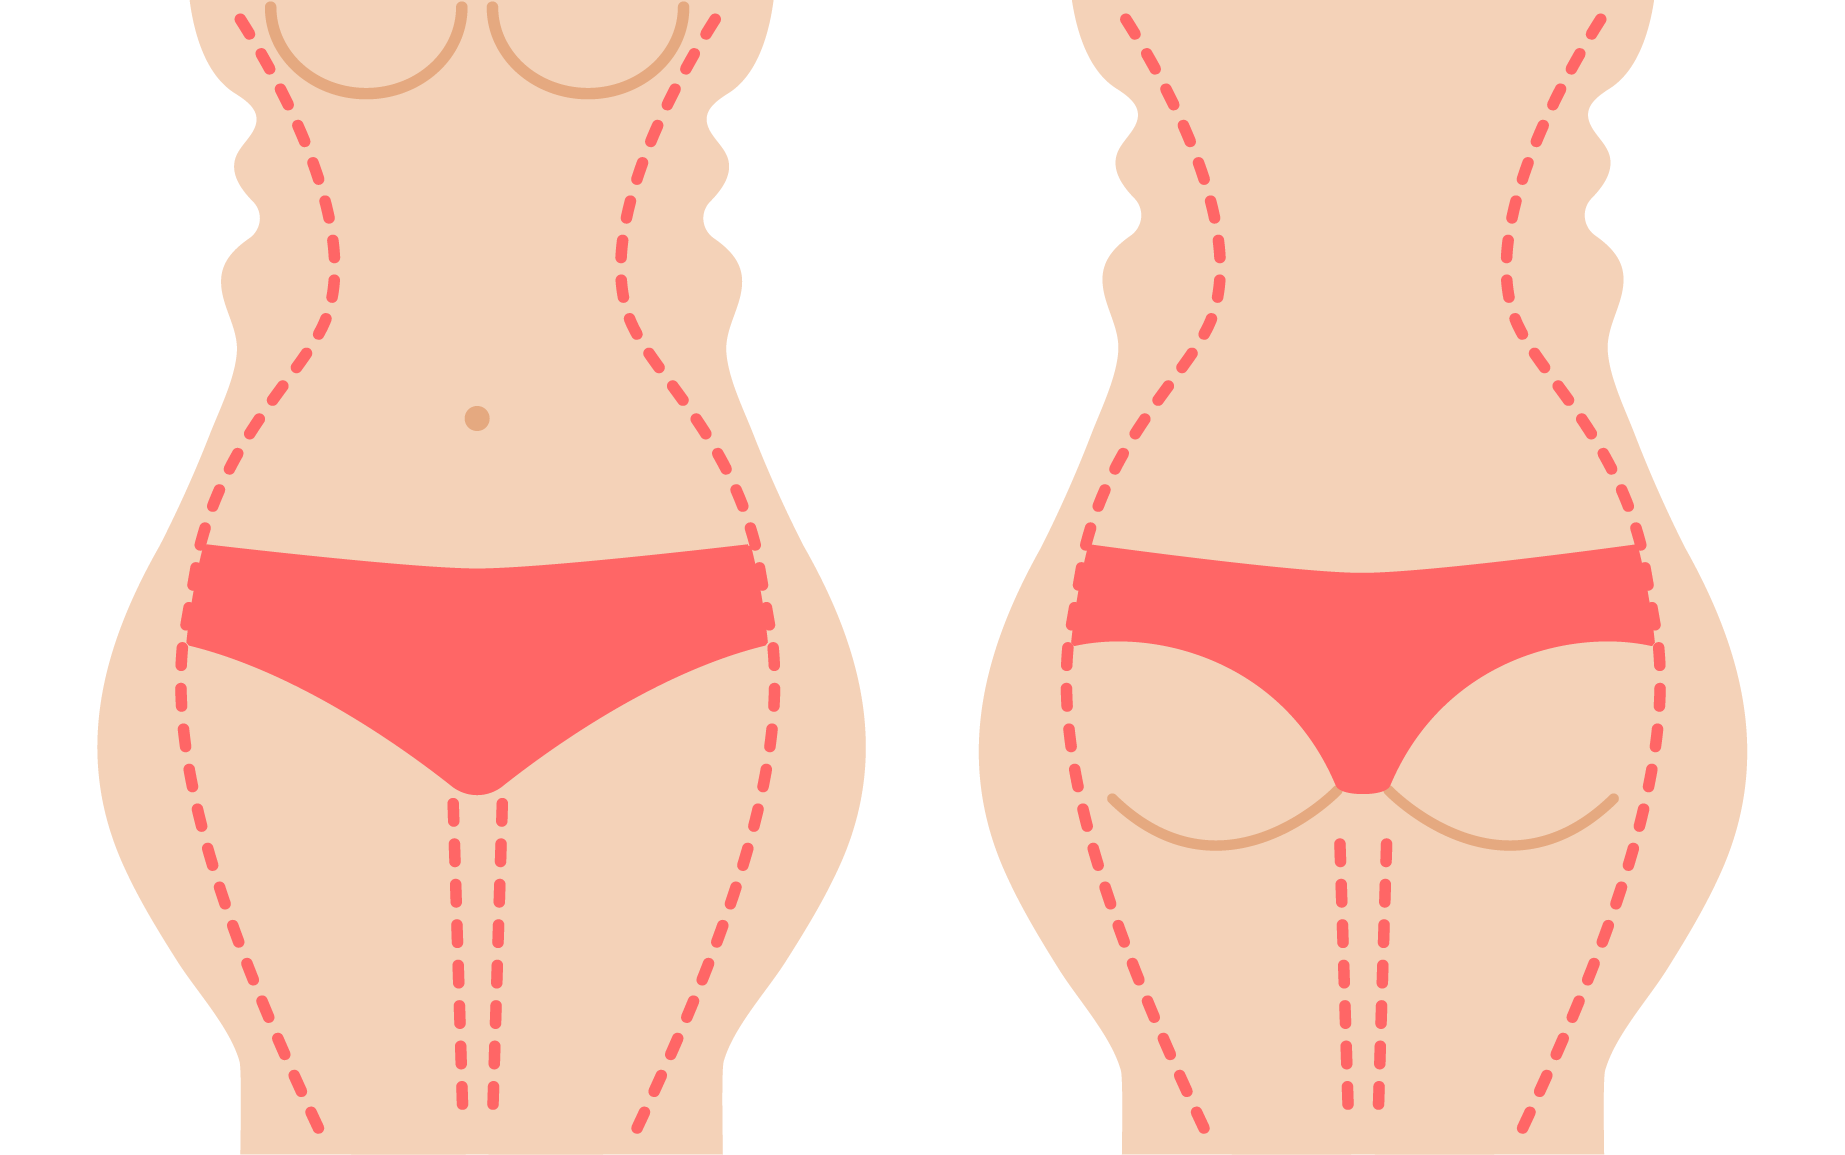 A, C, E) This 63-year-old woman presented for body contouring. (B, D